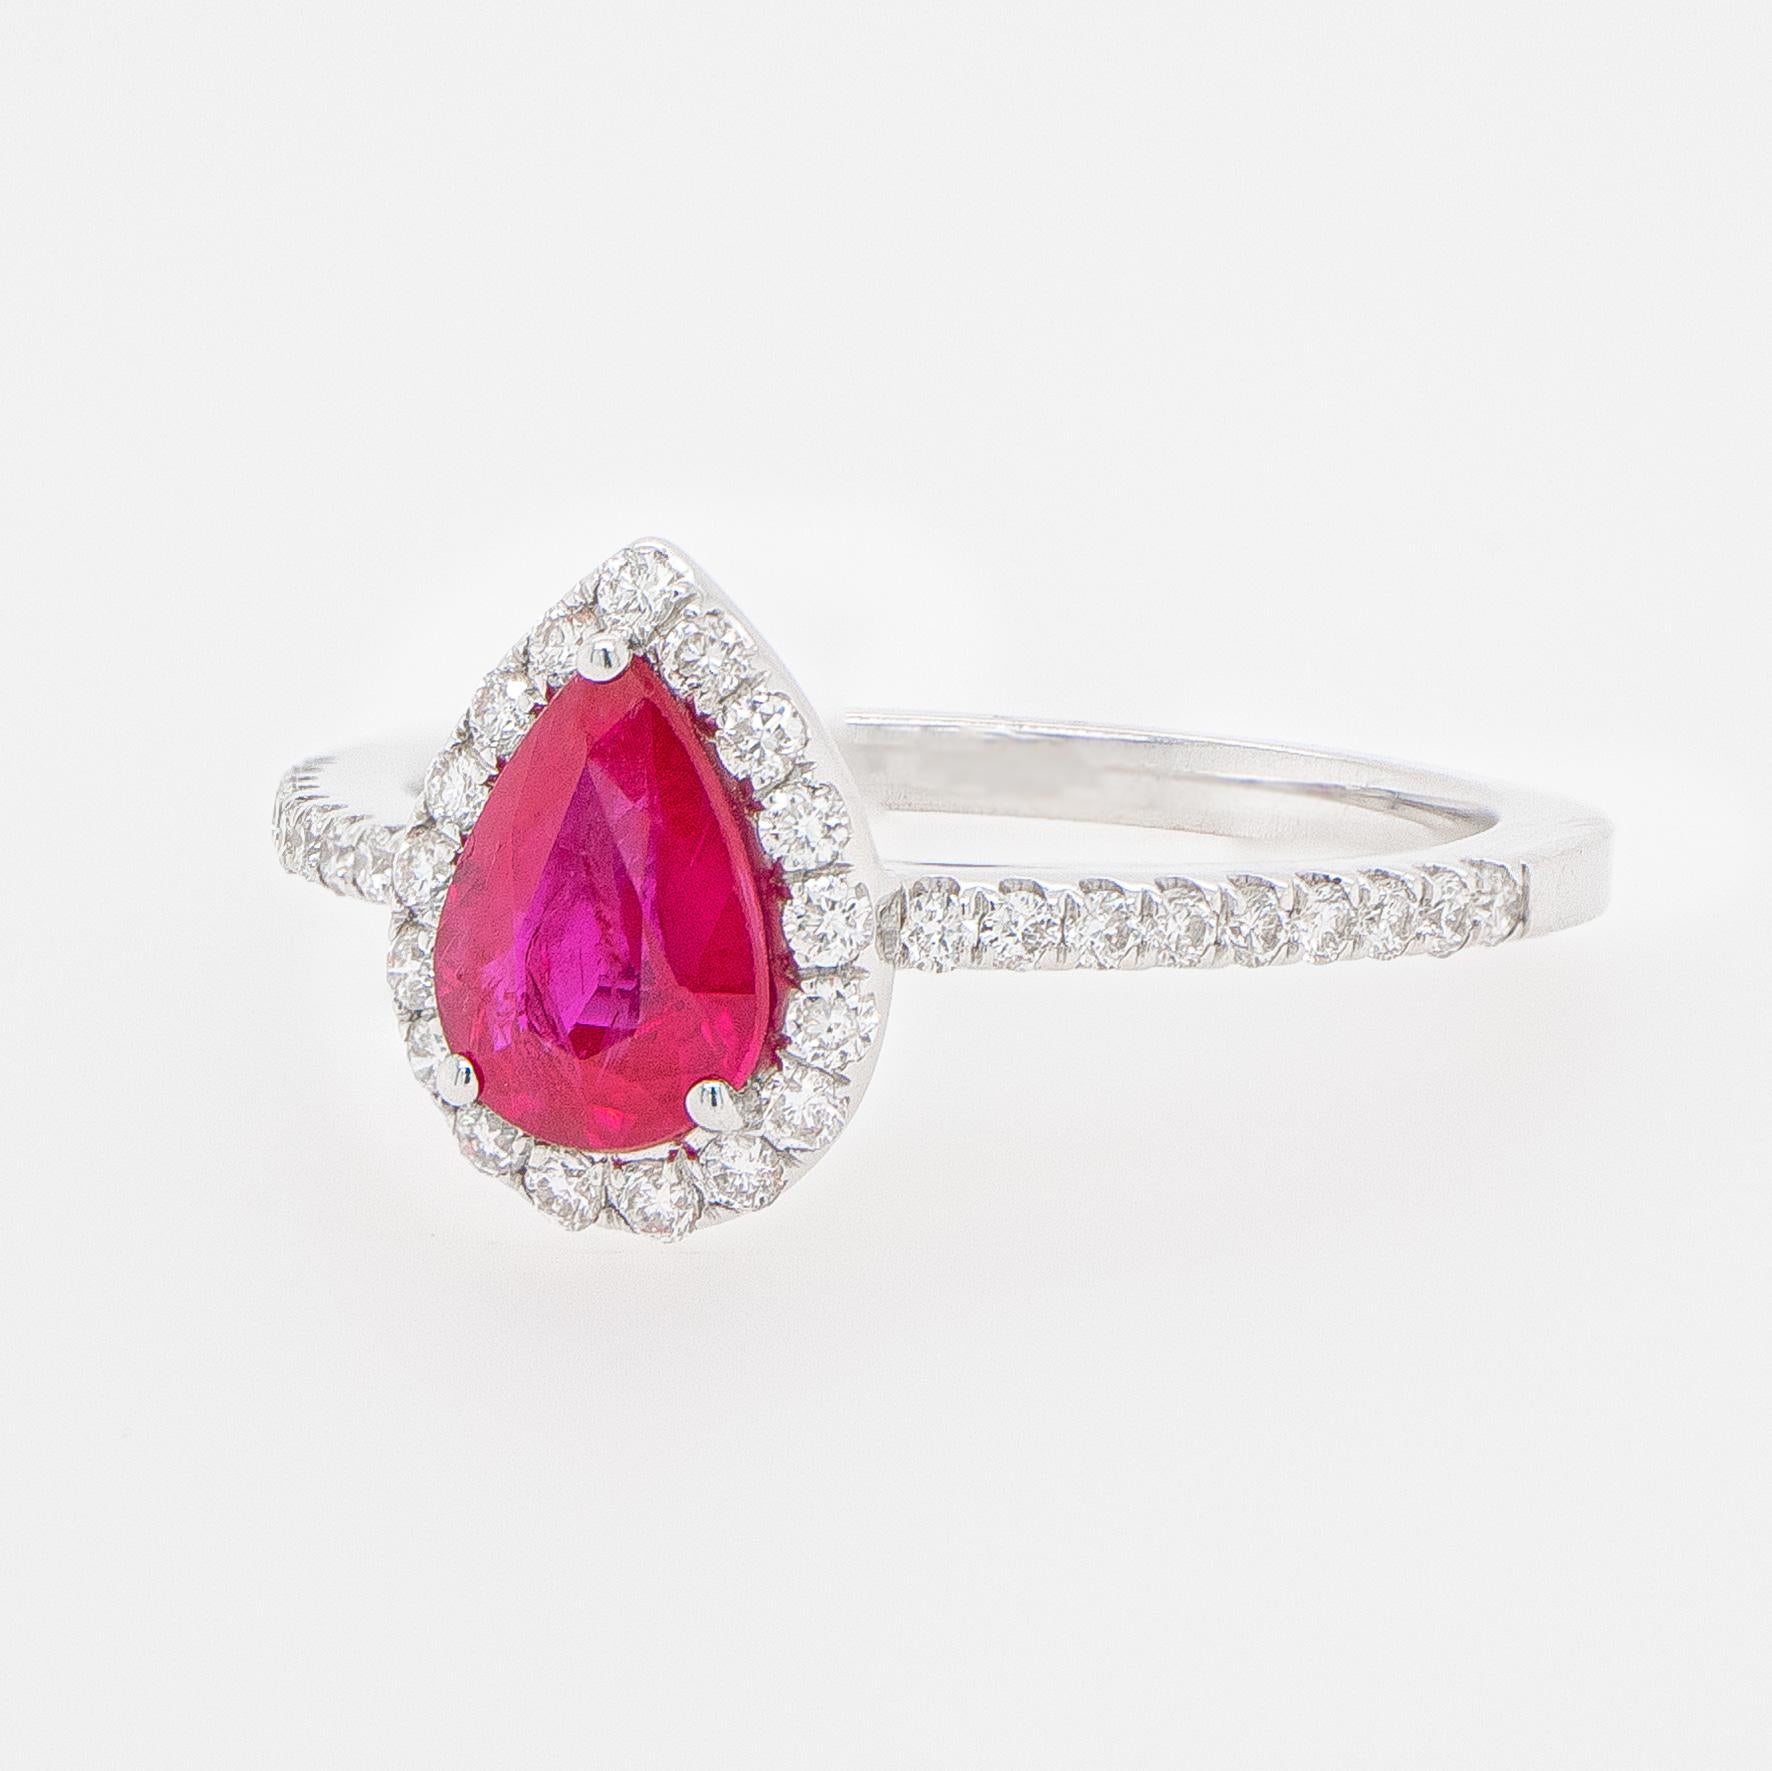 Contemporary Pear Cut Ruby Ring with Diamond Halo 18K White Gold